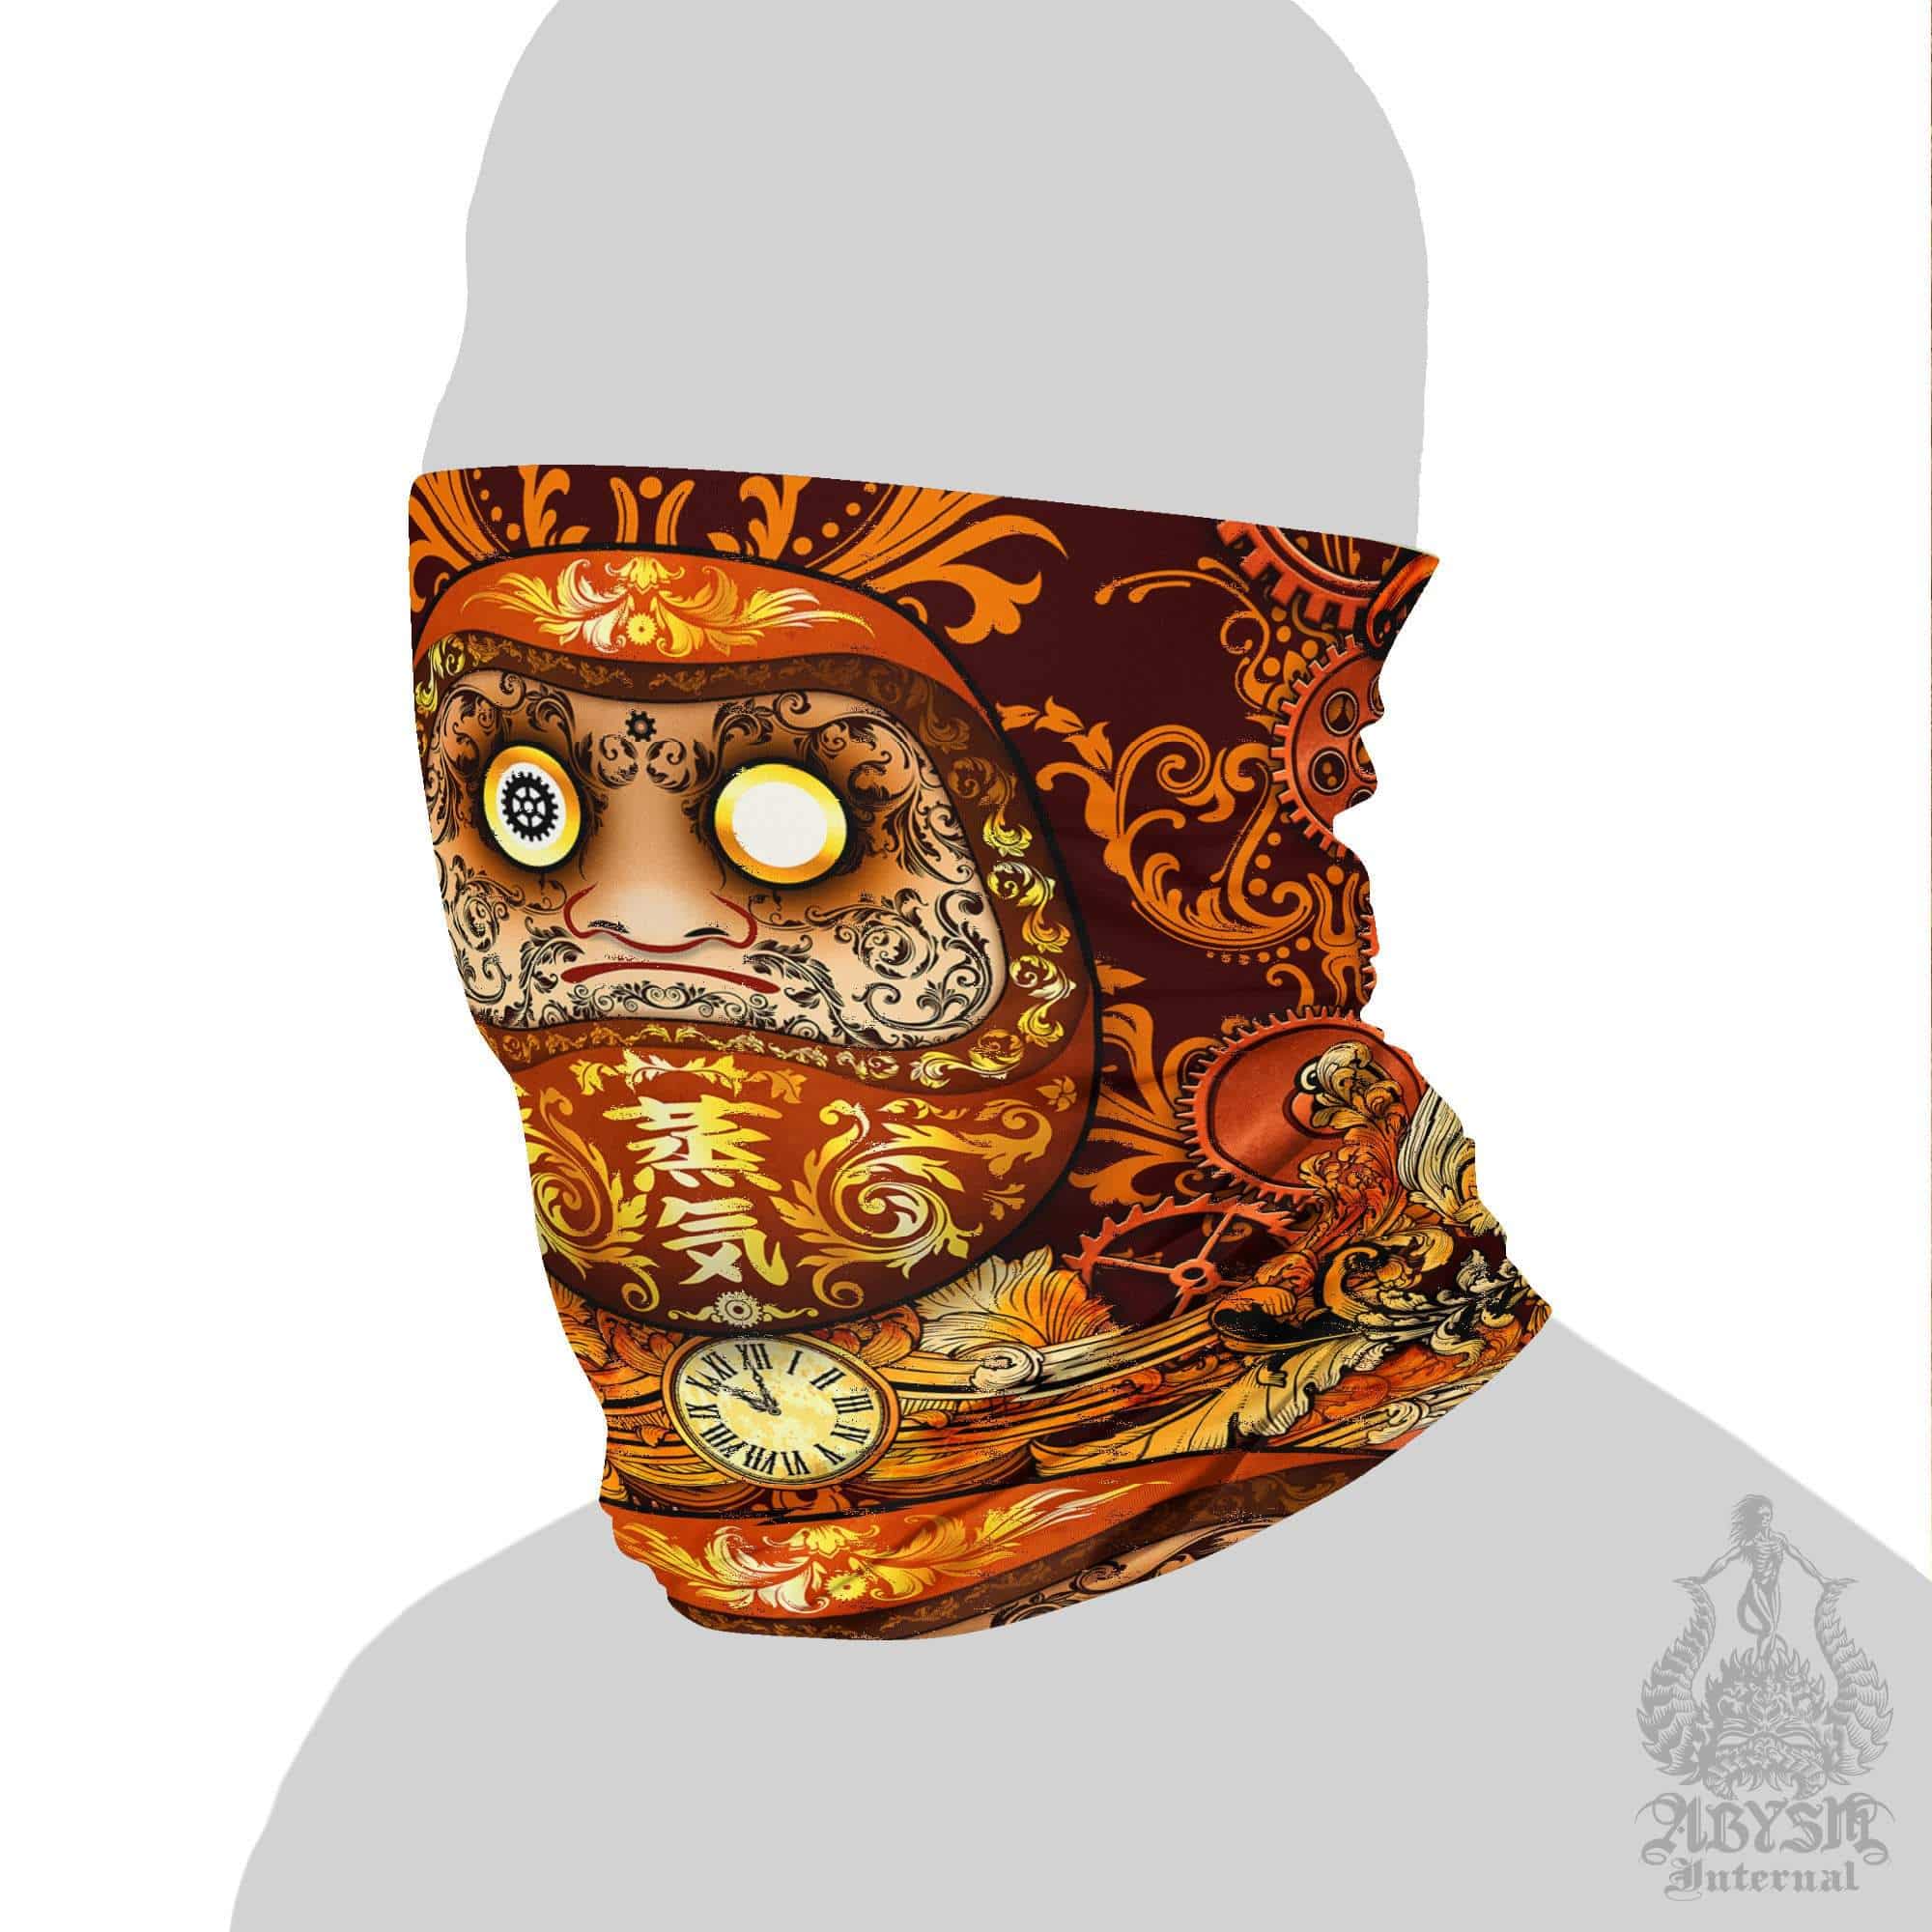 Japanese Neck Gaiter, Face Mask, Head Covering, Daruma, Funny Anime Style Outfit - Steampunk - Abysm Internal